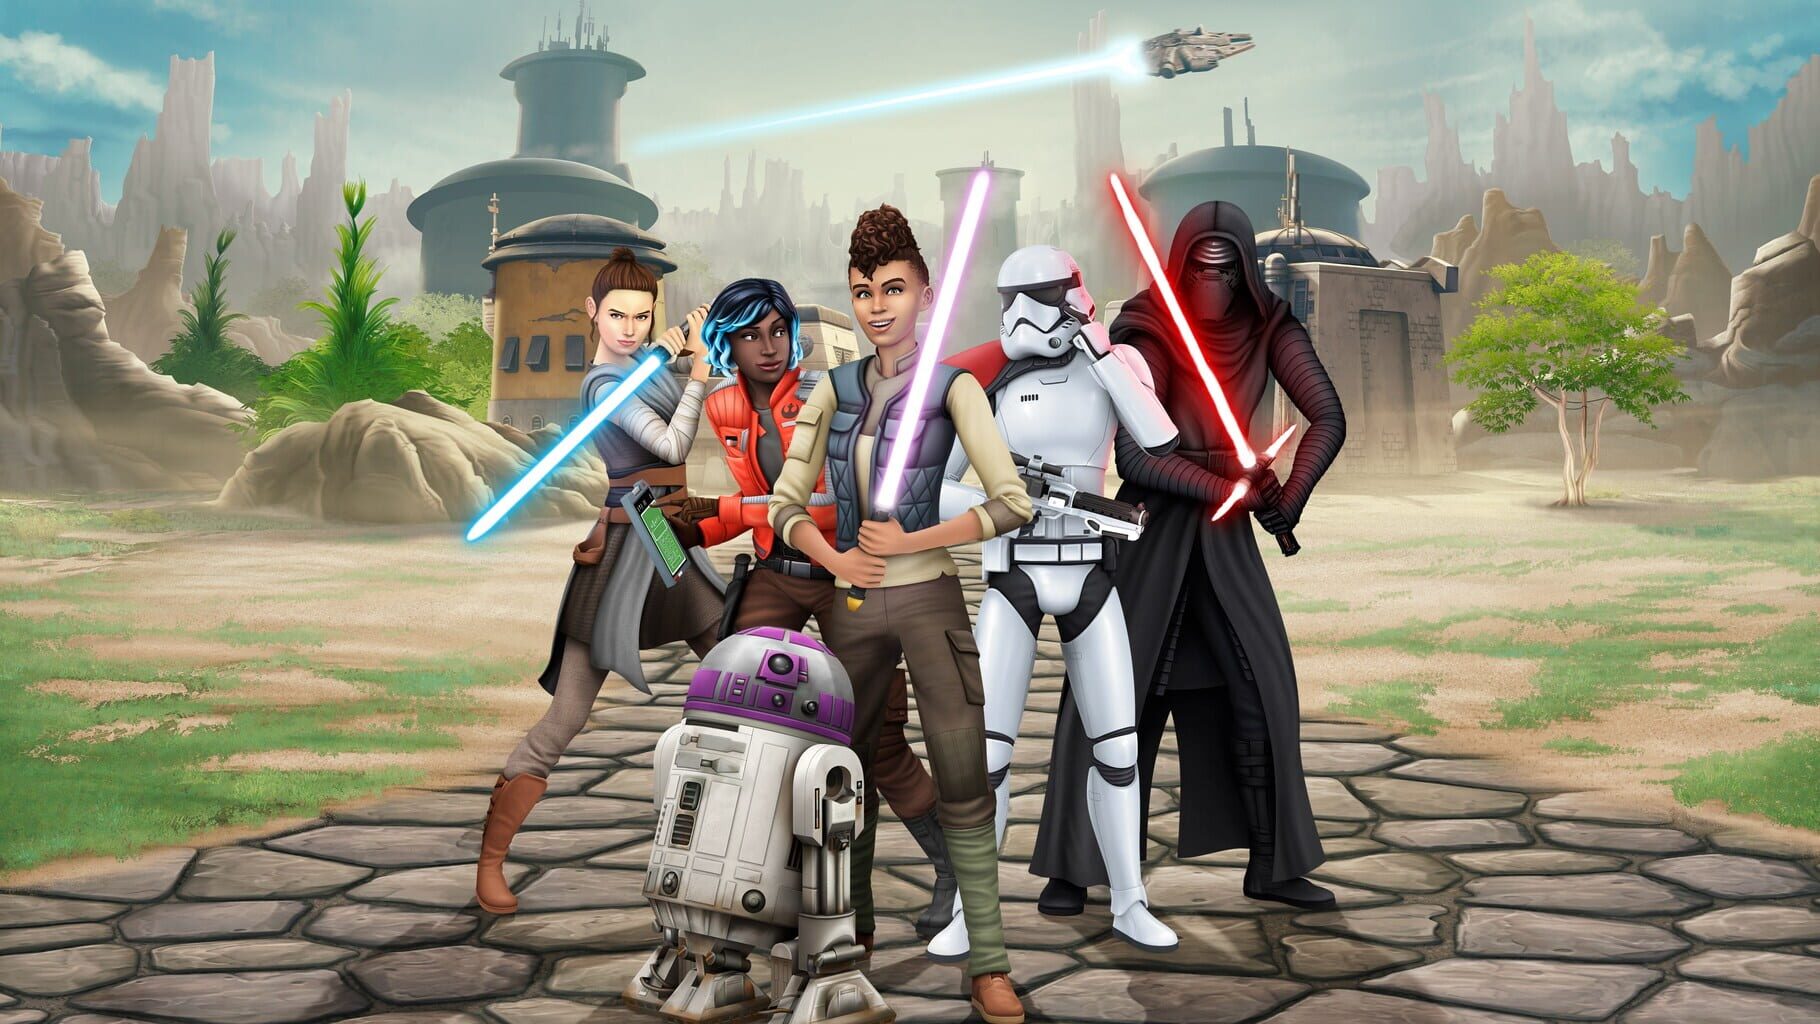 The Sims 4: Journey to Batuu Image